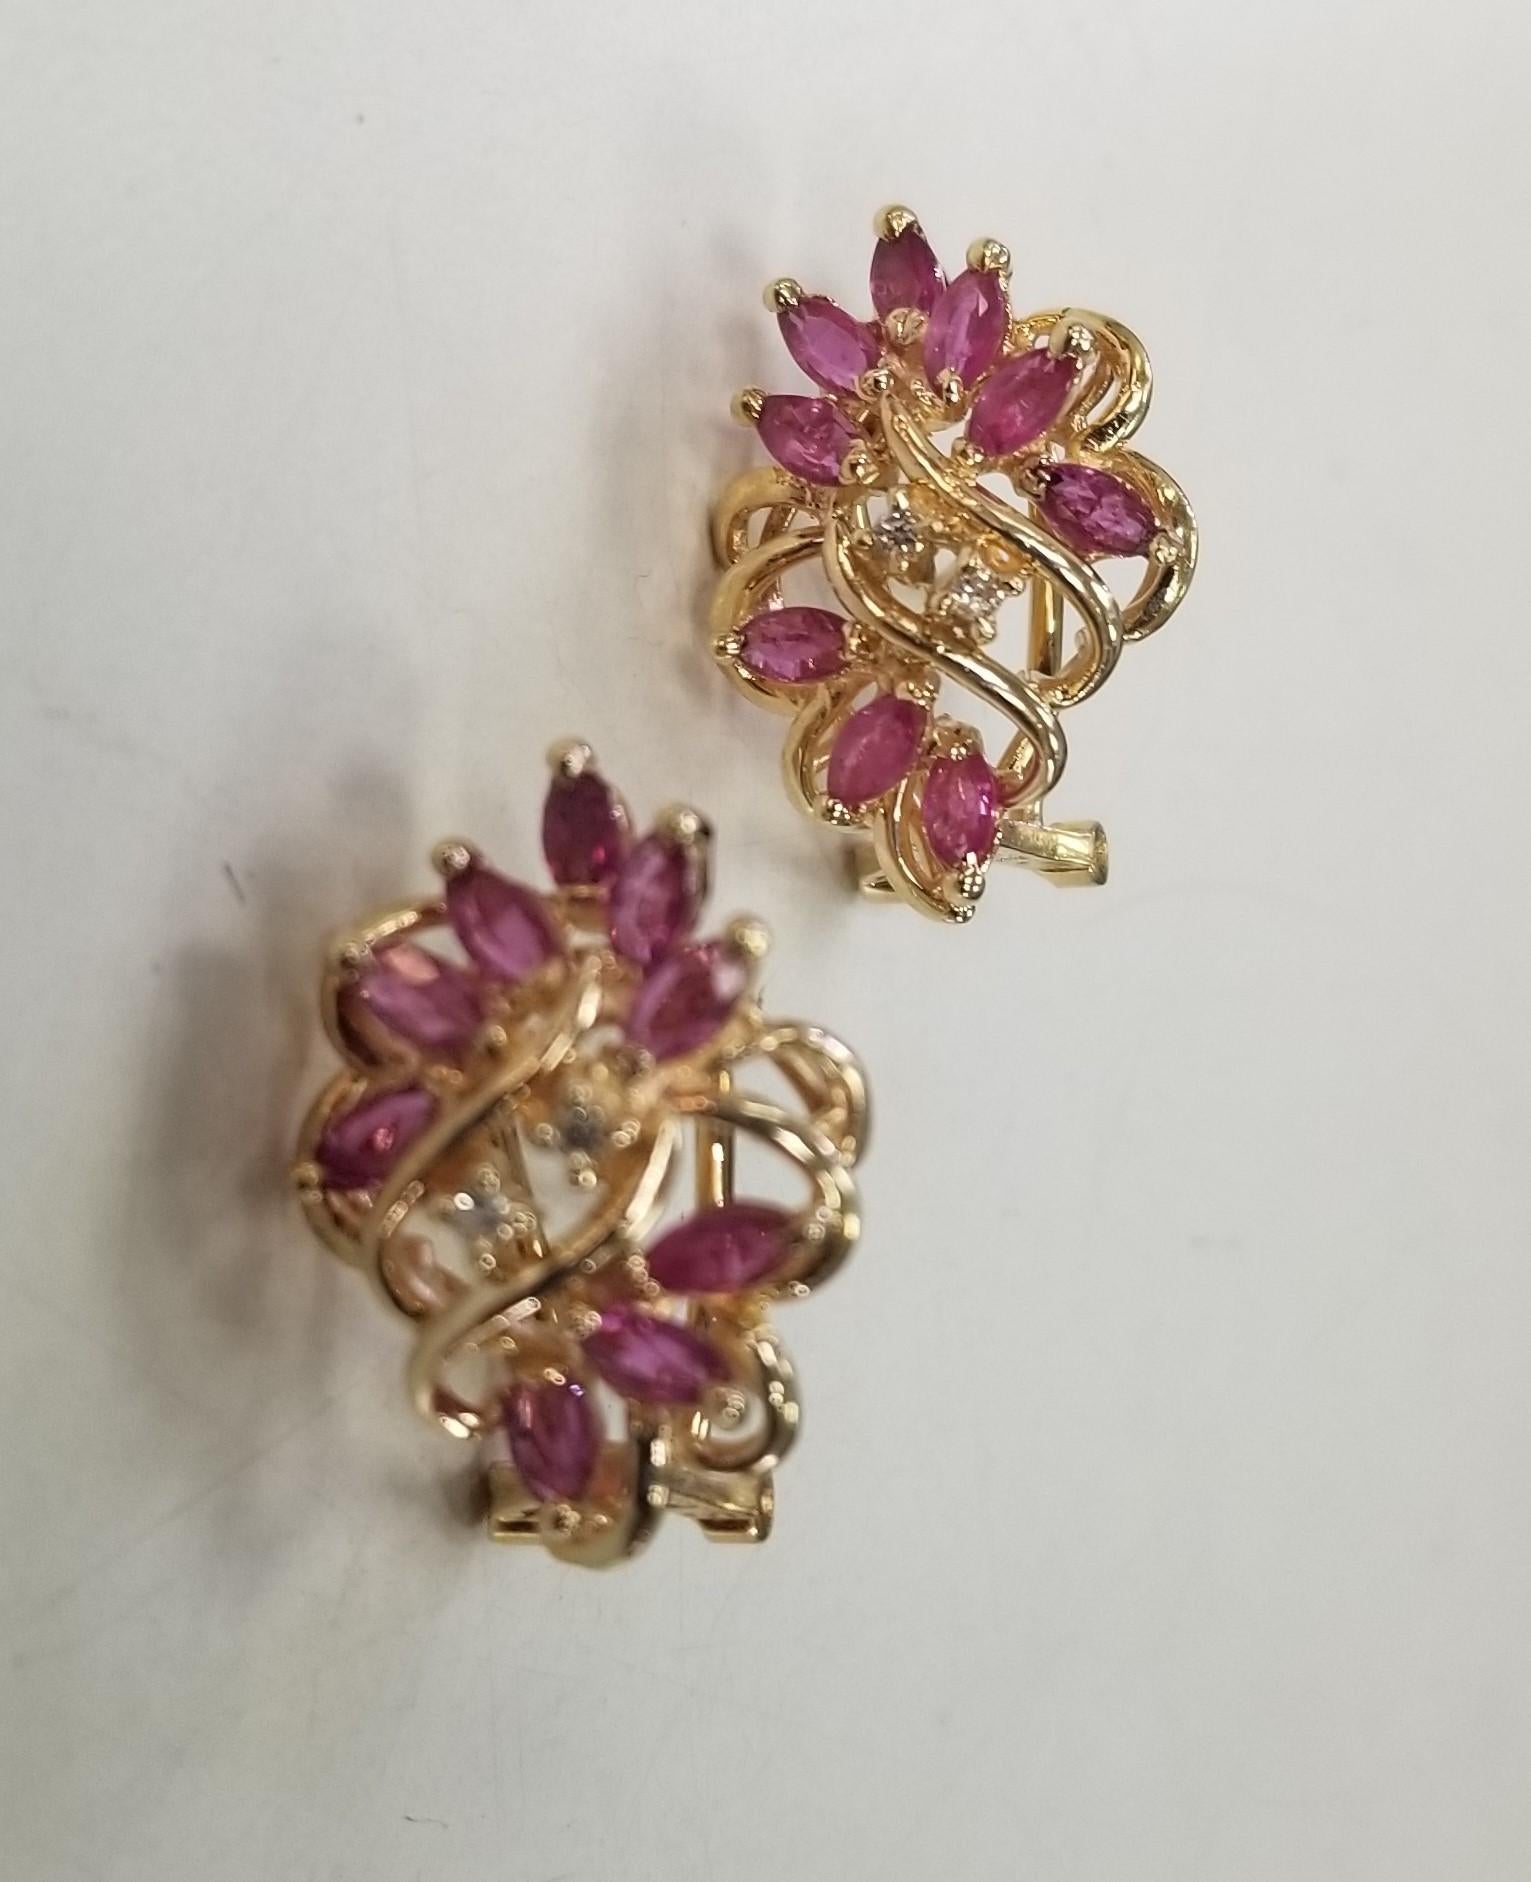 14k Yellow Gold Ruby and Diamond Cluster Earrings
Specifications:
Metal: 14K Yellow Gold
Second Stone: 4 Diamonds .05pts.
Main stone: 18 Ruby marquise cut 1.70cts.
Color: GH
Weight: 6.4 Gr
Weight: 6.4mm

